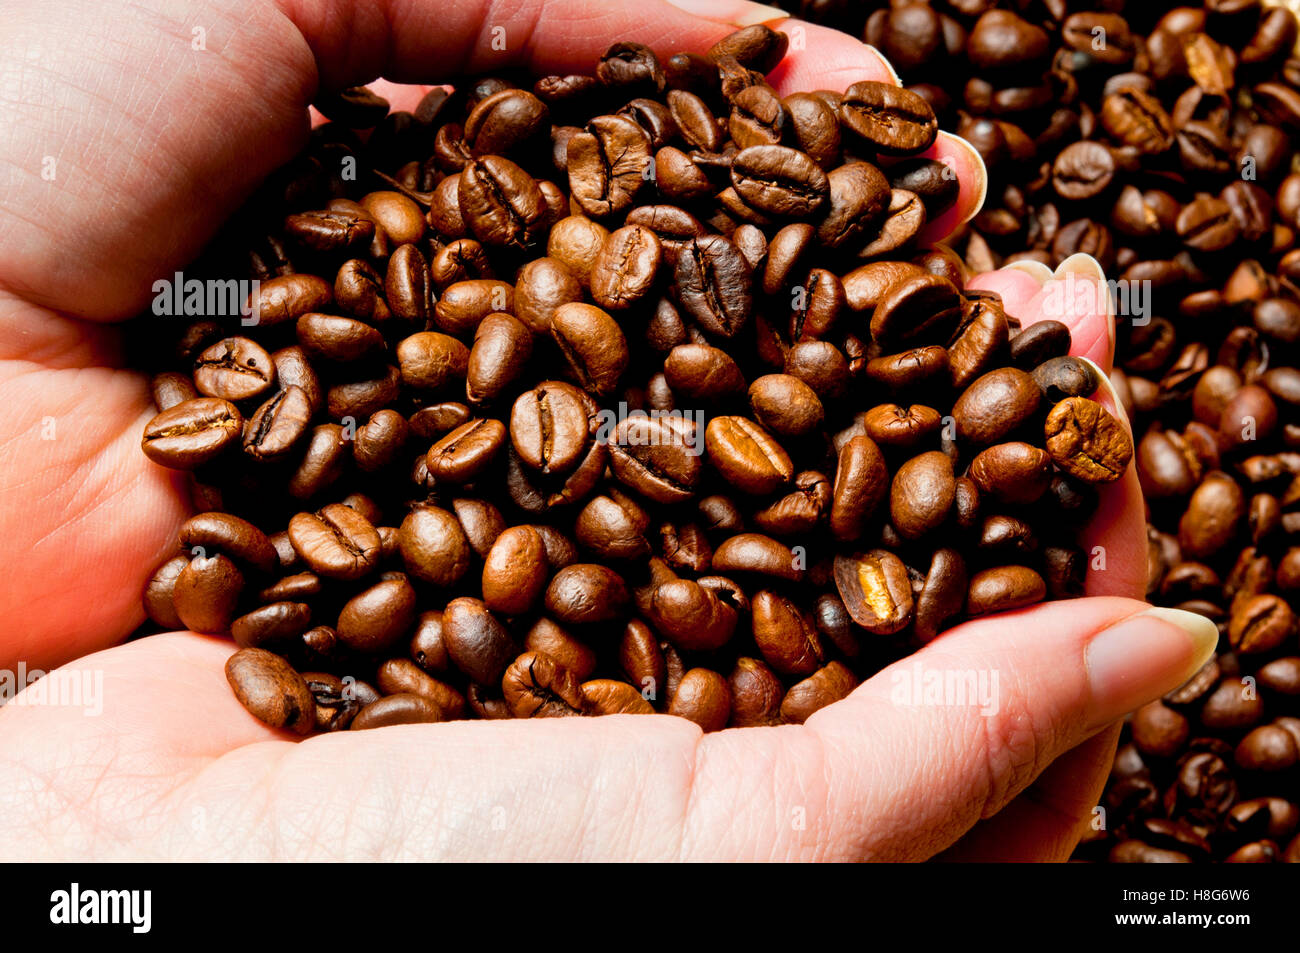 Hands holding Coffee beans Banque D'Images